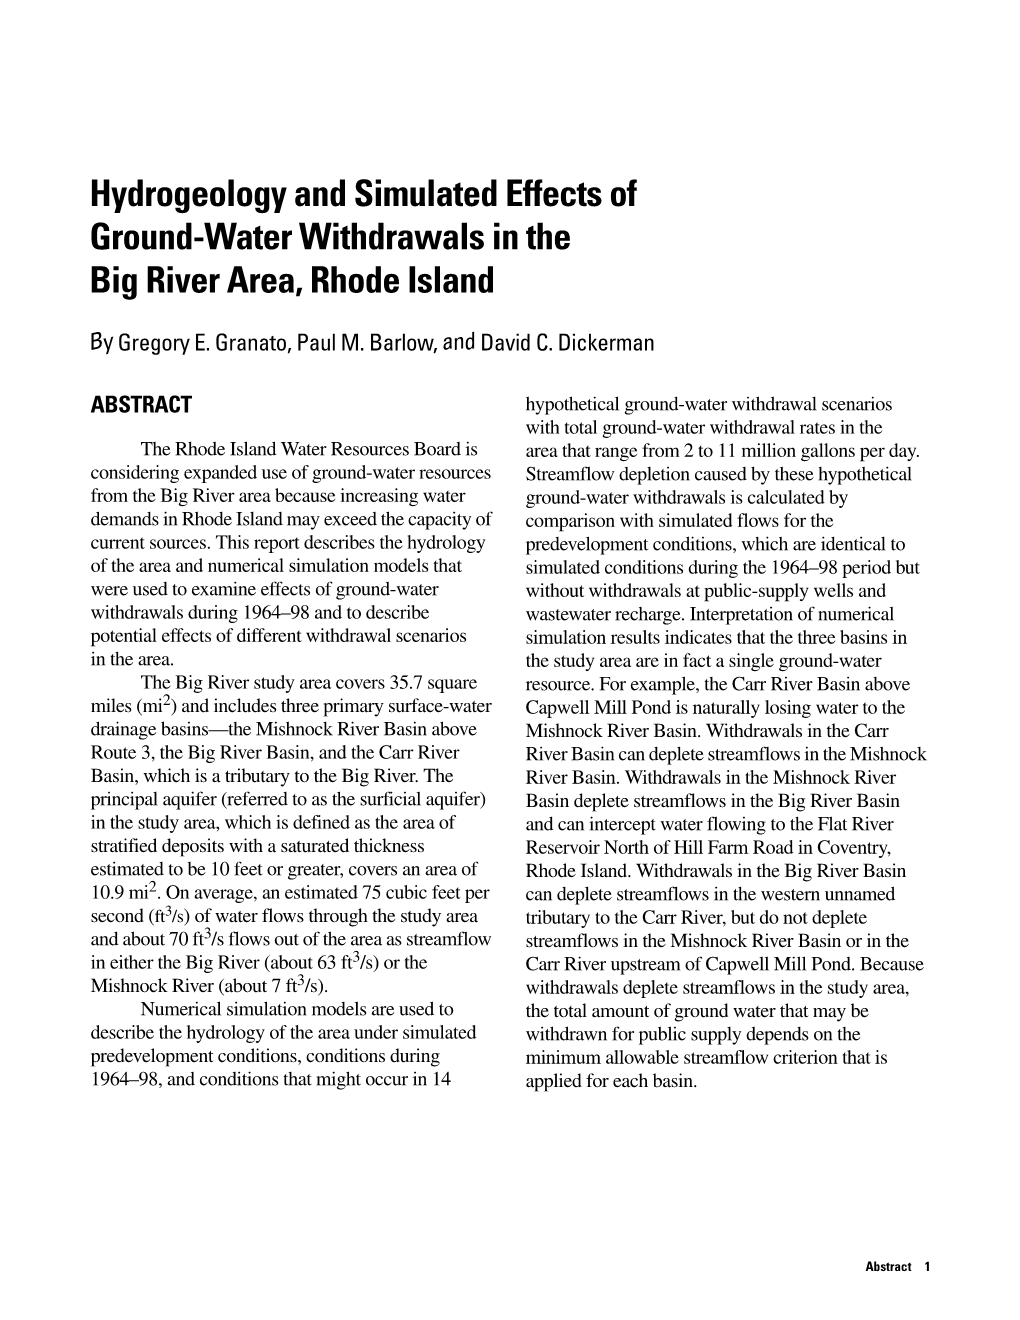 Hydrogeology and Simulated Effects of Ground-Water Withdrawals in the Big River Area, Rhode Island